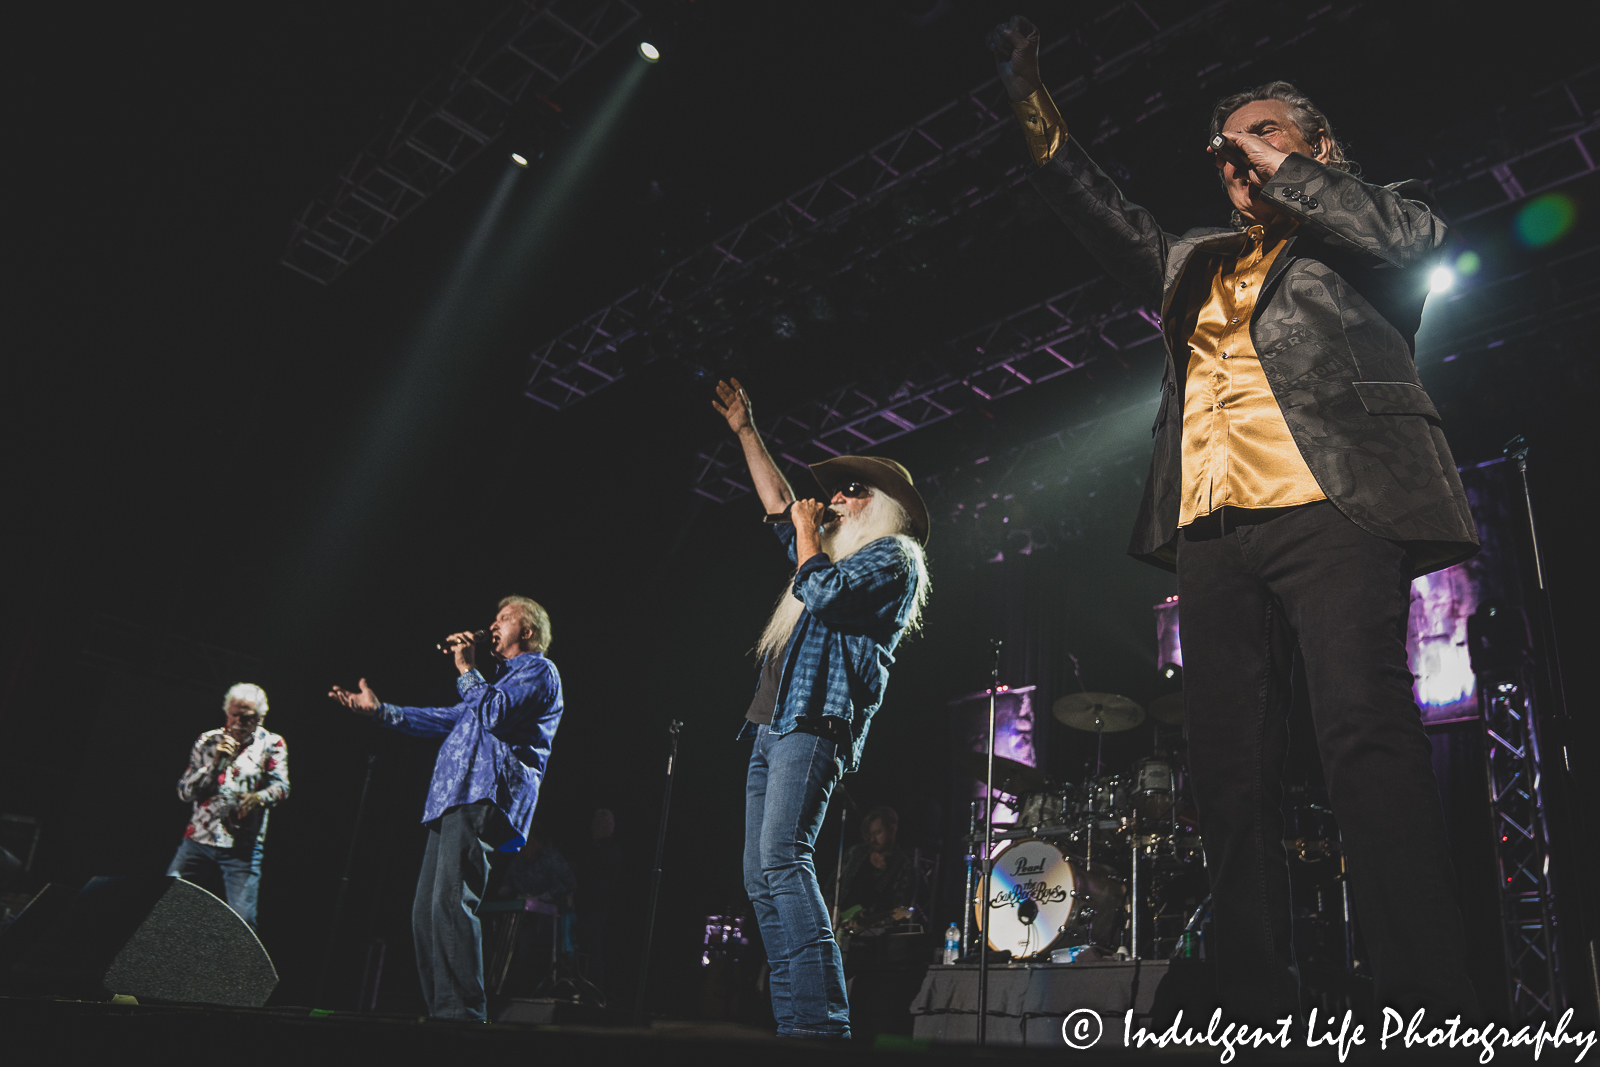 The Oak Ridge Boys live in concert performing the 1983 chart-topping country hit "American Made" at Ameristar Casino Hotel Kansas City on September 24, 2021.